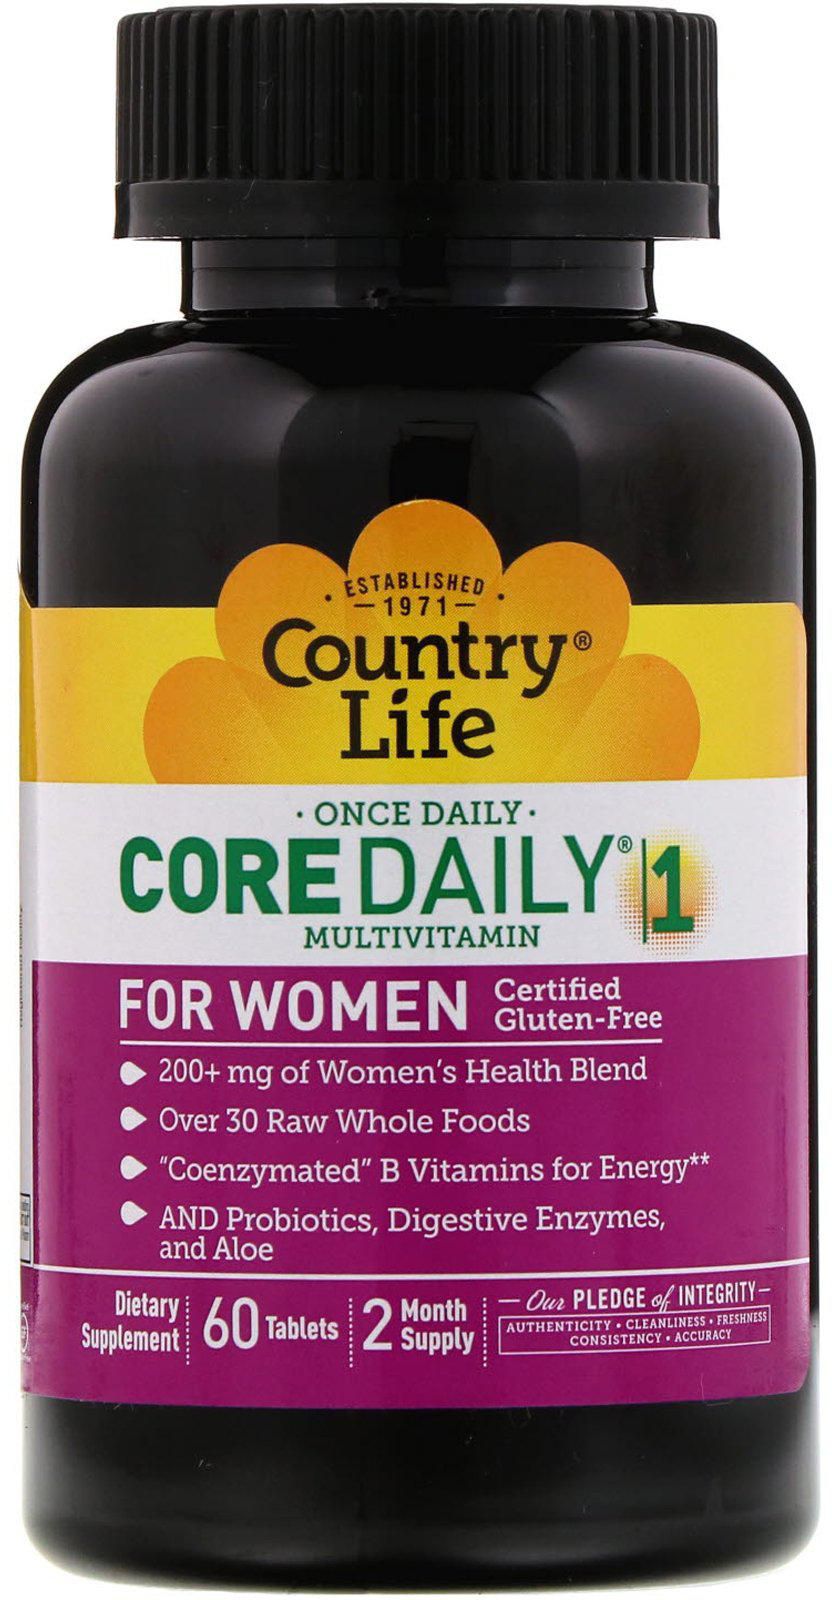 Country Life, Core Daily-1 فيتامينات متعددة للنساء، 60 قرص